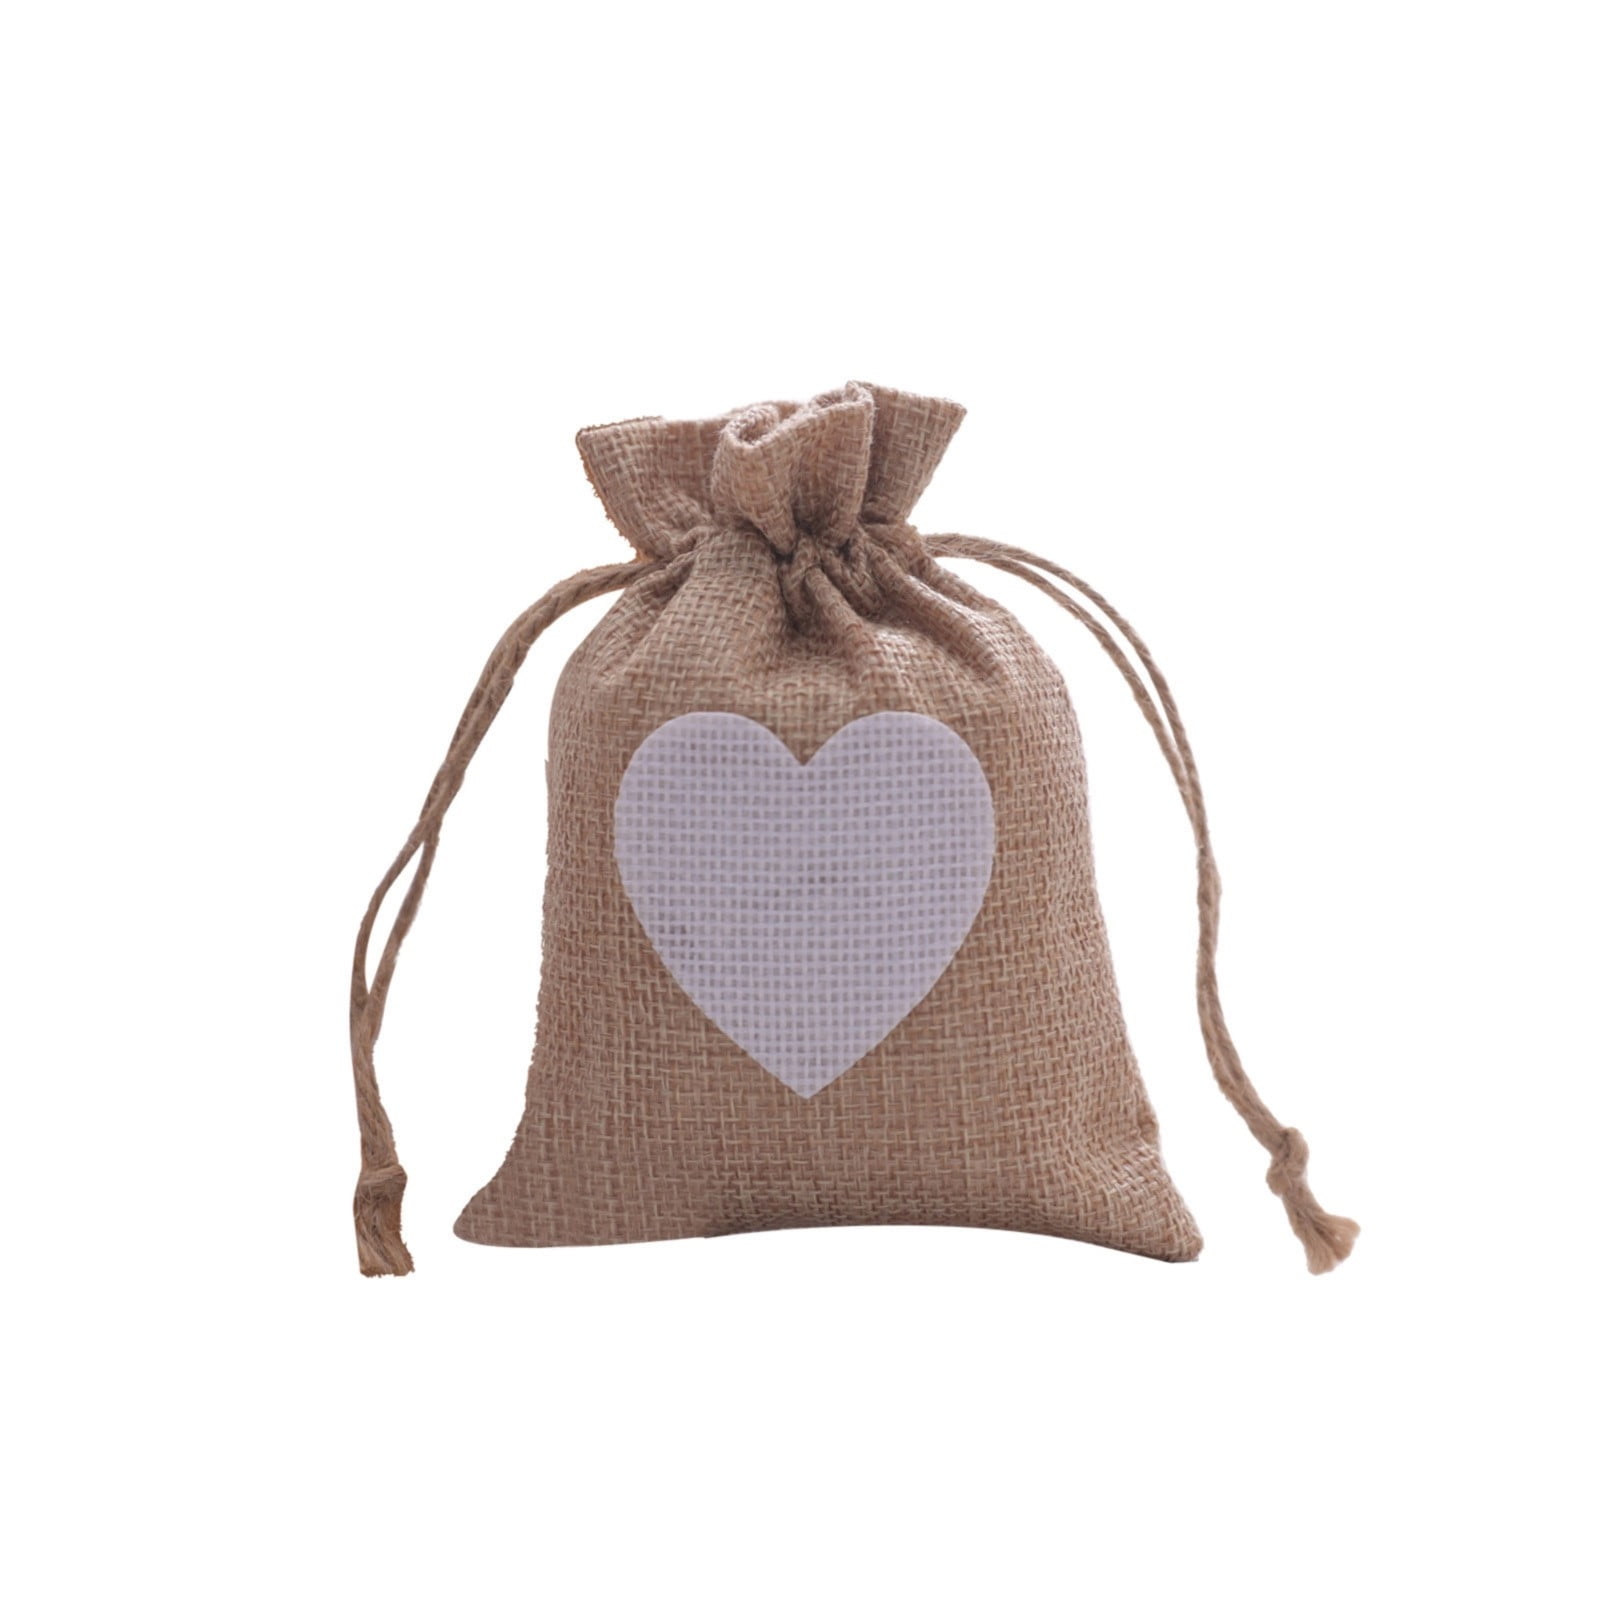 CleverDelights 18 x 24 Burlap Bags with Natural Jute Drawstring - 6 Pack